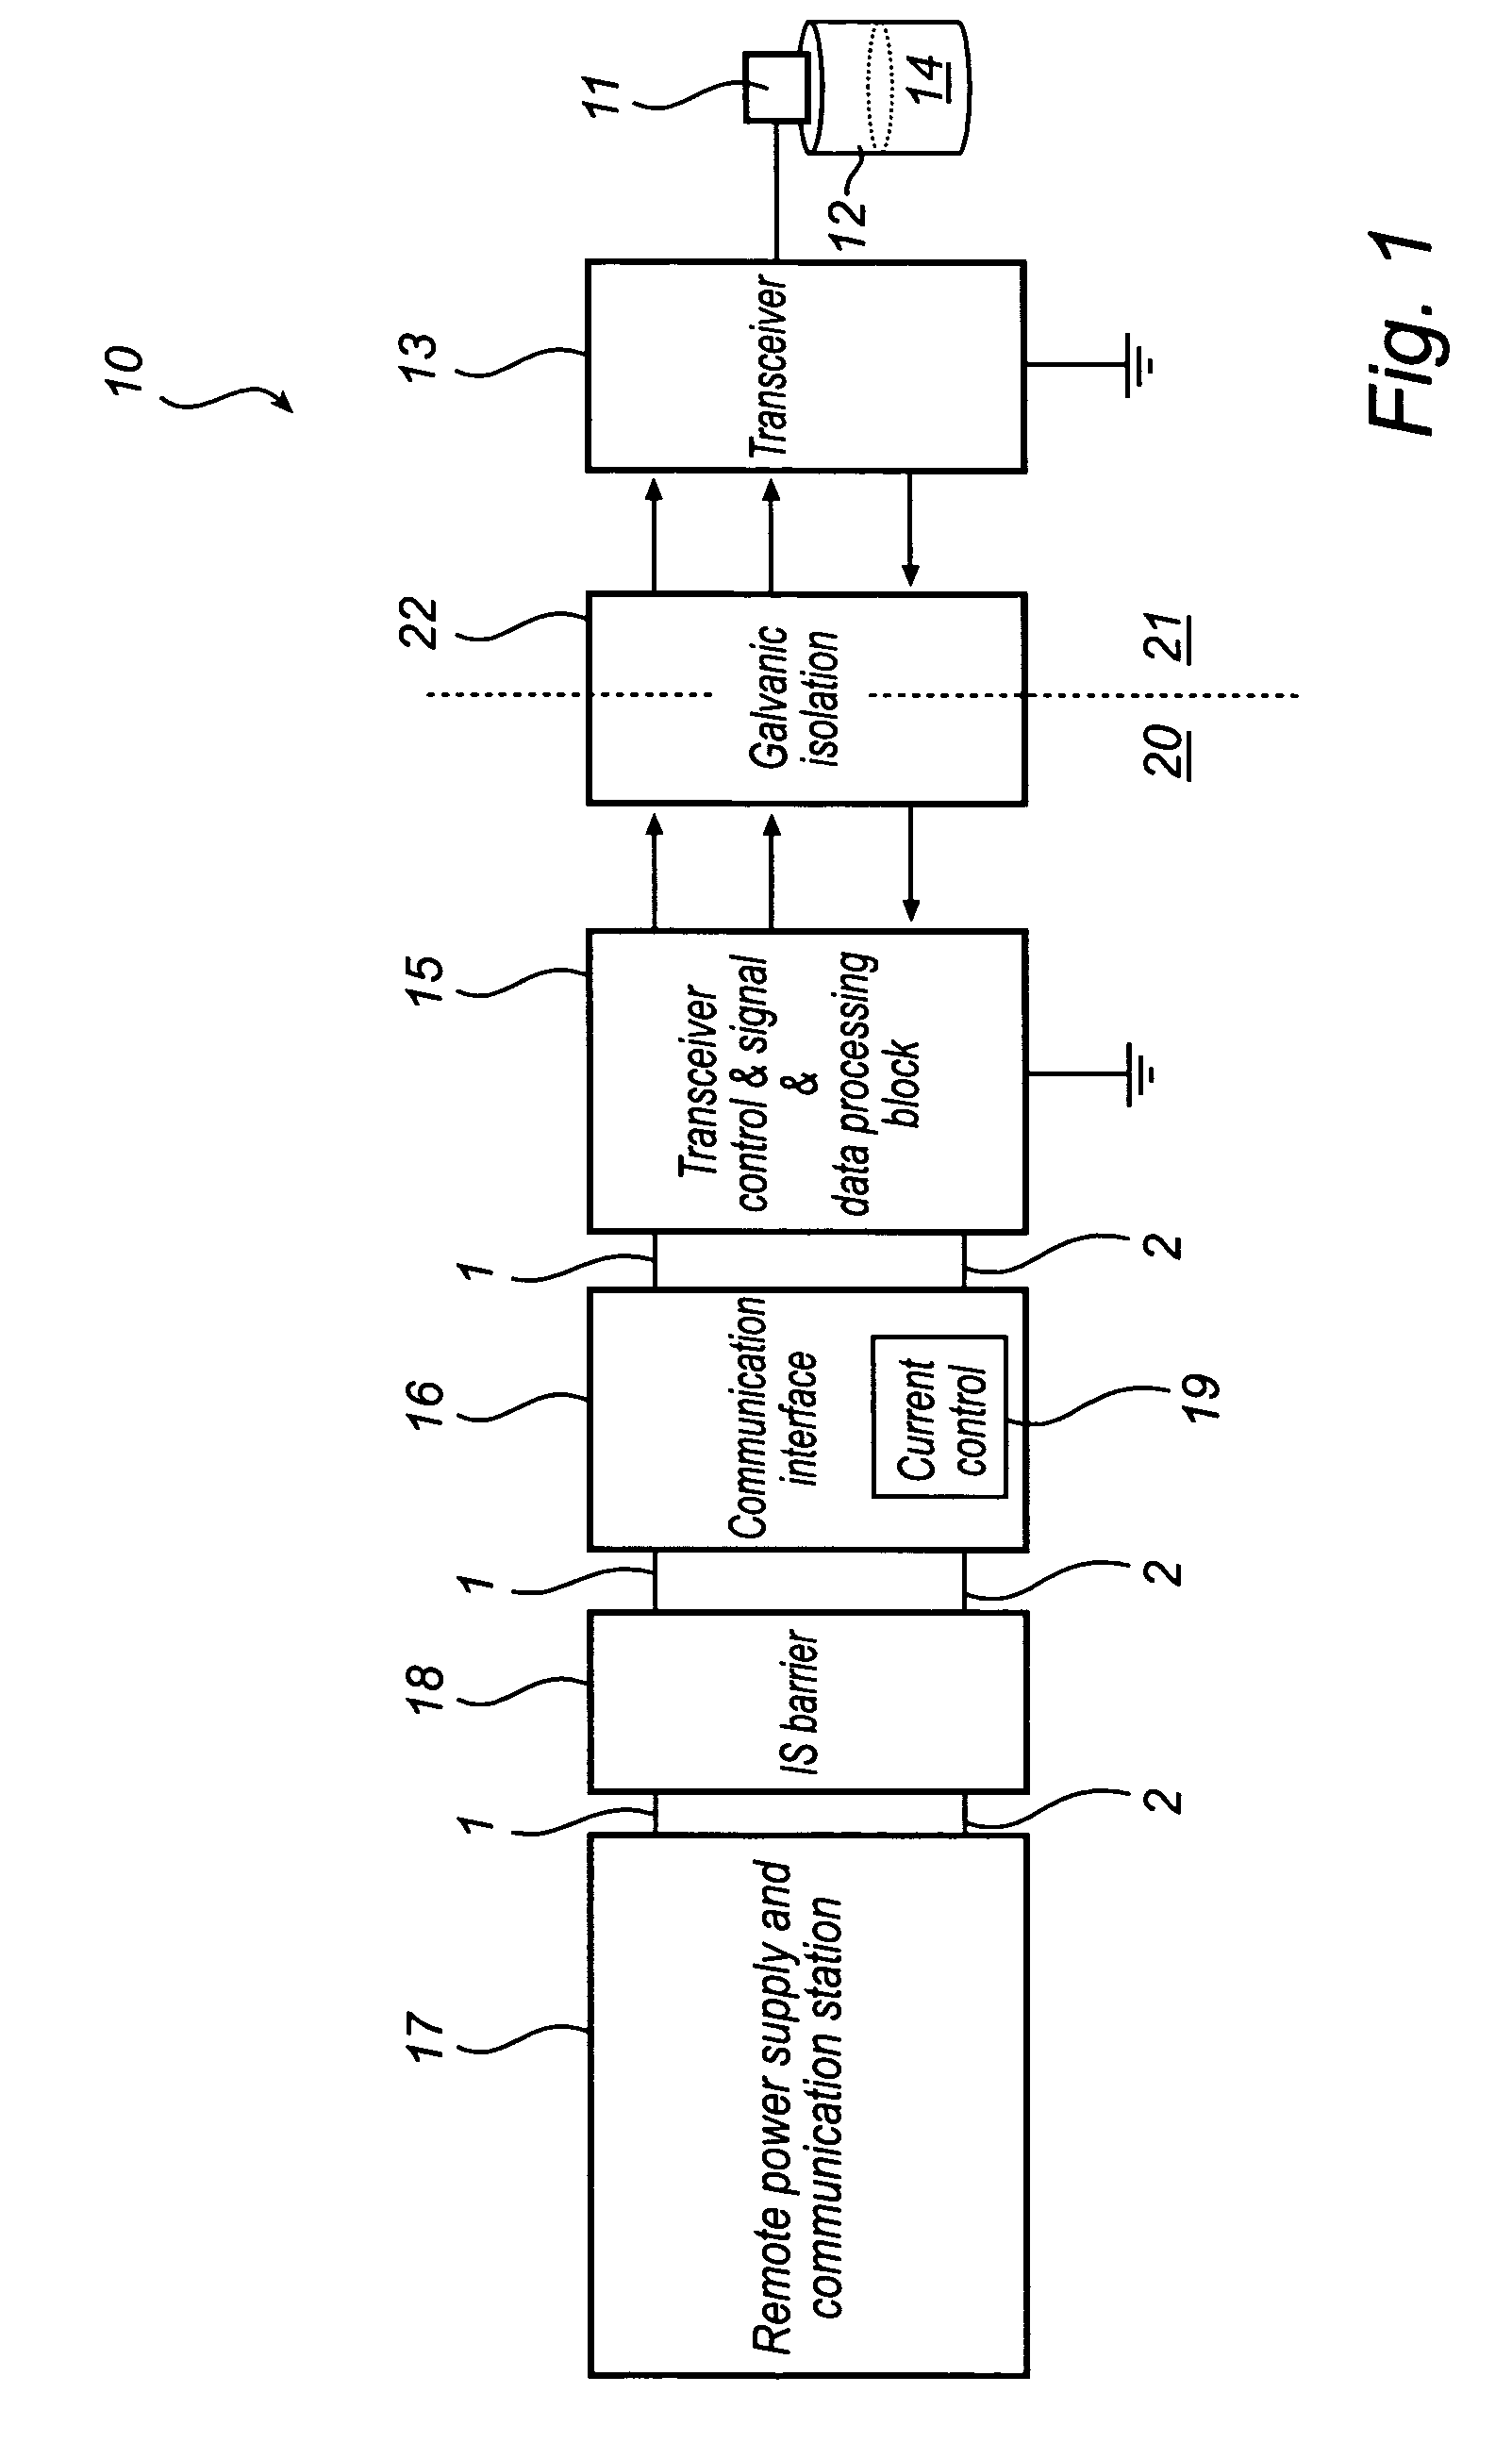 Radar level gauge with a galvanically isolated interface